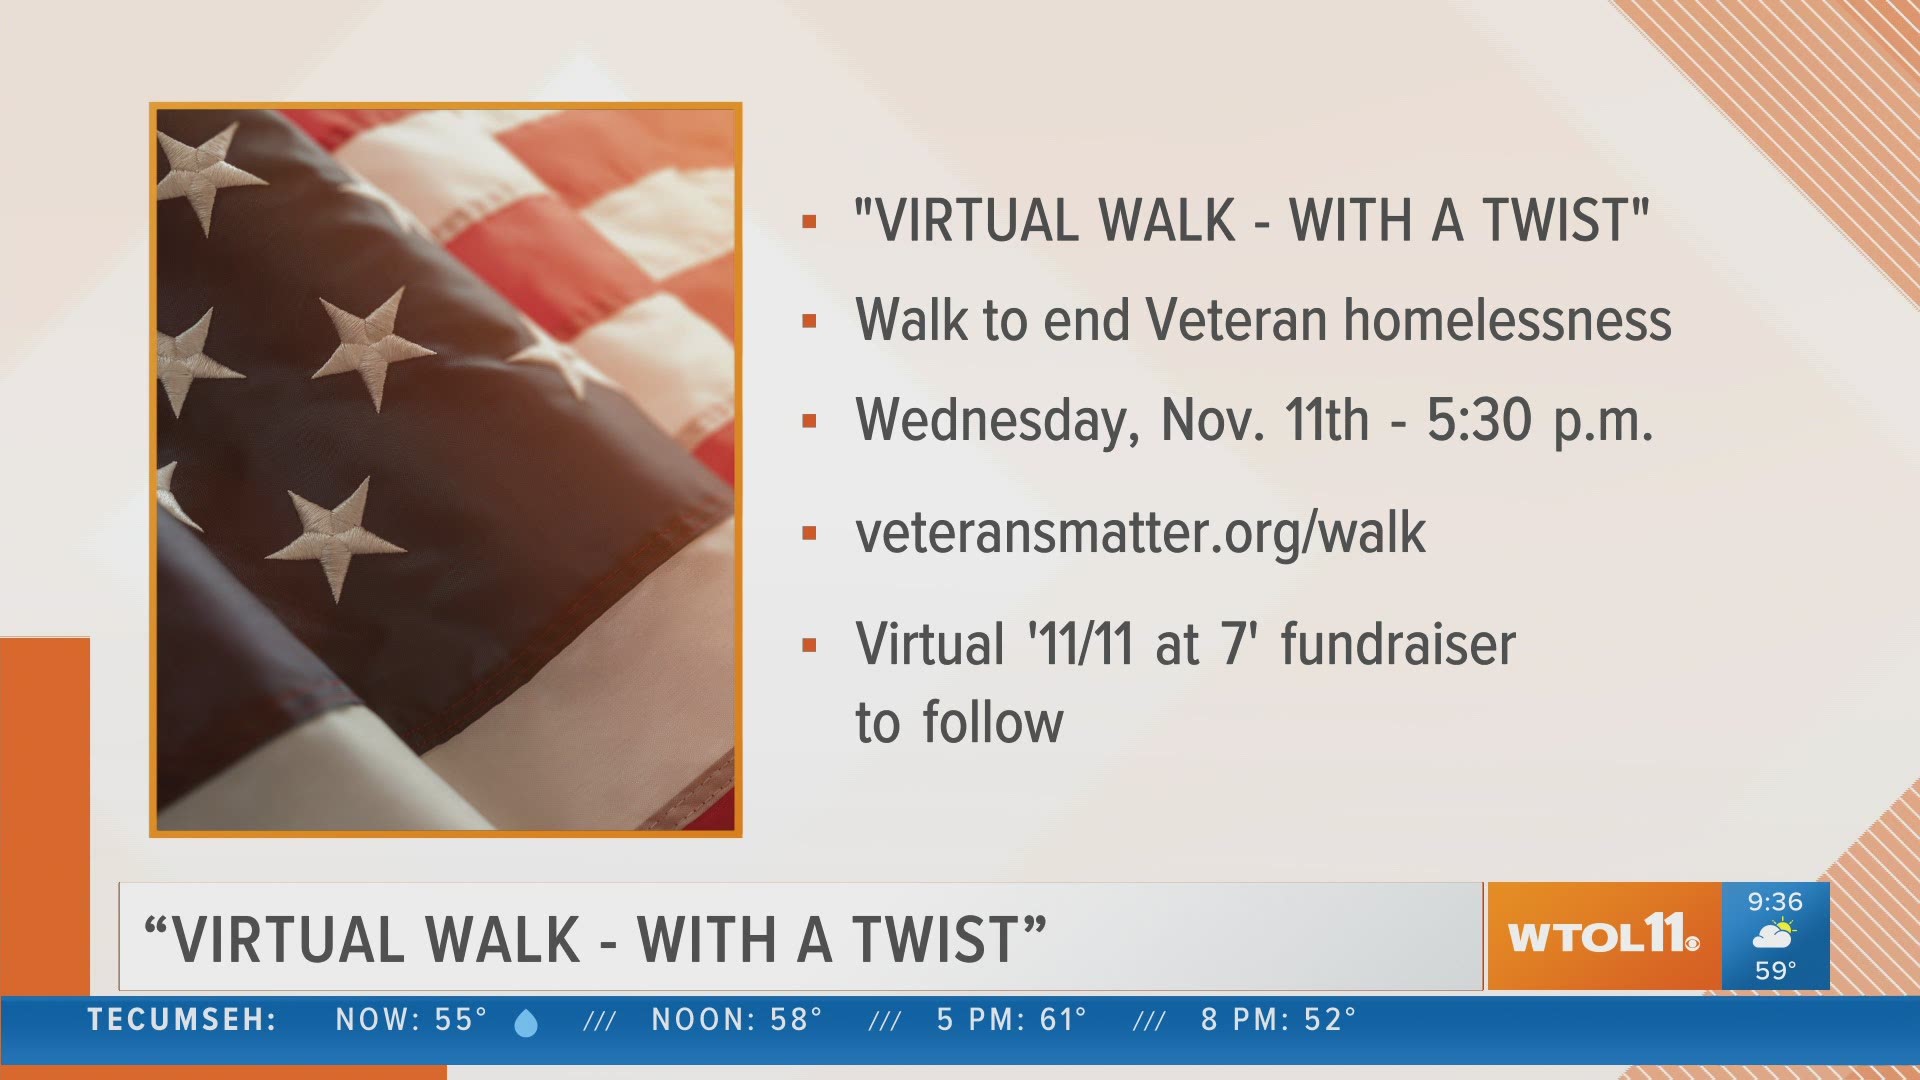 Veterans Matter is holding a 'Virtual Walk - With a Twist' this year to raise funds to end veteran homelessness.